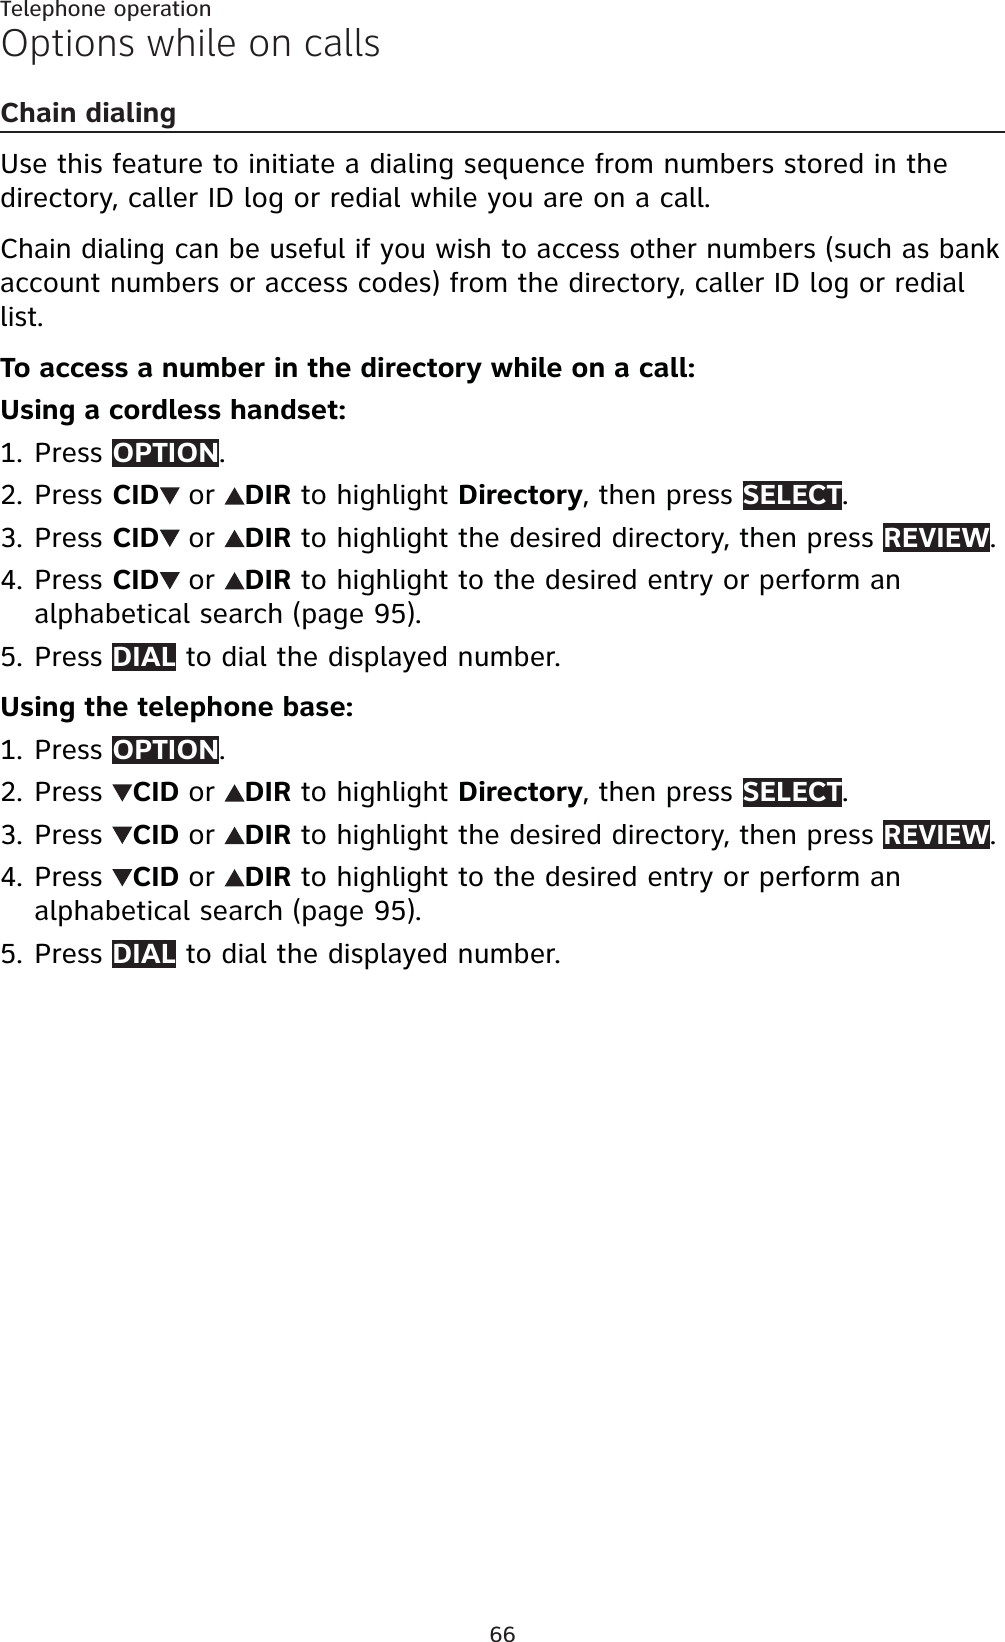 66Telephone operationOptions while on callsChain dialingUse this feature to initiate a dialing sequence from numbers stored in the directory, caller ID log or redial while you are on a call. Chain dialing can be useful if you wish to access other numbers (such as bank account numbers or access codes) from the directory, caller ID log or redial list.To access a number in the directory while on a call:Using a cordless handset:Press OPTION.Press CID or DIR to highlight Directory, then press SELECT.Press CID or DIR to highlight the desired directory, then press REVIEW.Press CID or DIR to highlight to the desired entry or perform an alphabetical search (page 95).Press DIAL to dial the displayed number.Using the telephone base:Press OPTION.Press  CID or DIR to highlight Directory, then press SELECT.Press  CID or DIR to highlight the desired directory, then press REVIEW.Press  CID or DIR to highlight to the desired entry or perform an alphabetical search (page 95).Press DIAL to dial the displayed number.1.2.3.4.5.1.2.3.4.5.